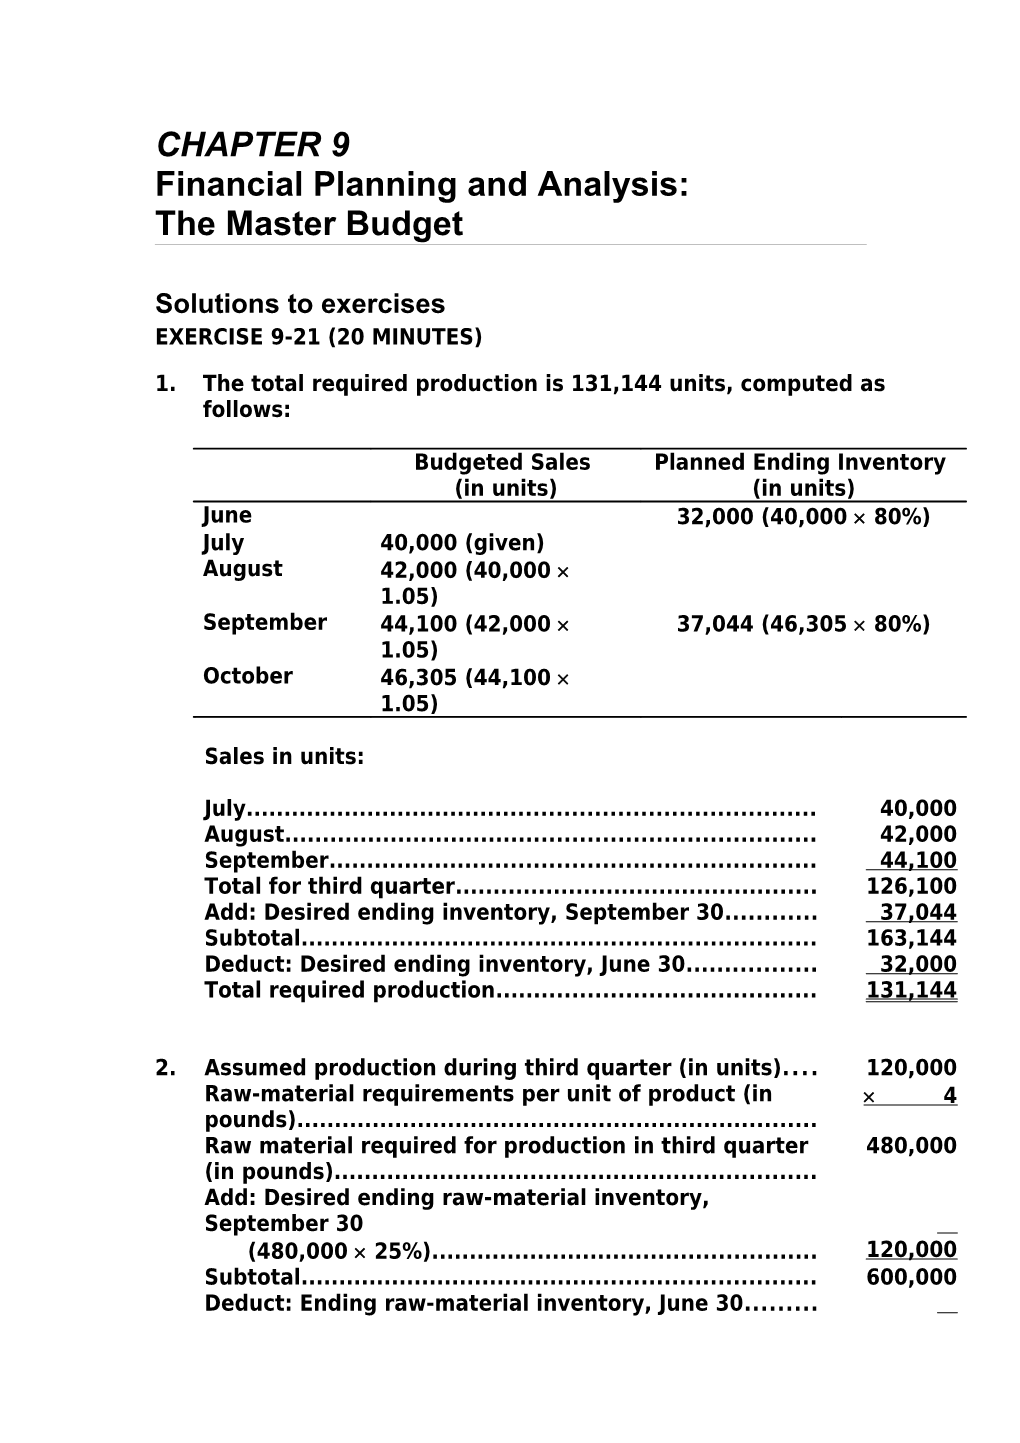 Financial Planning and Analysis: the Master Budget